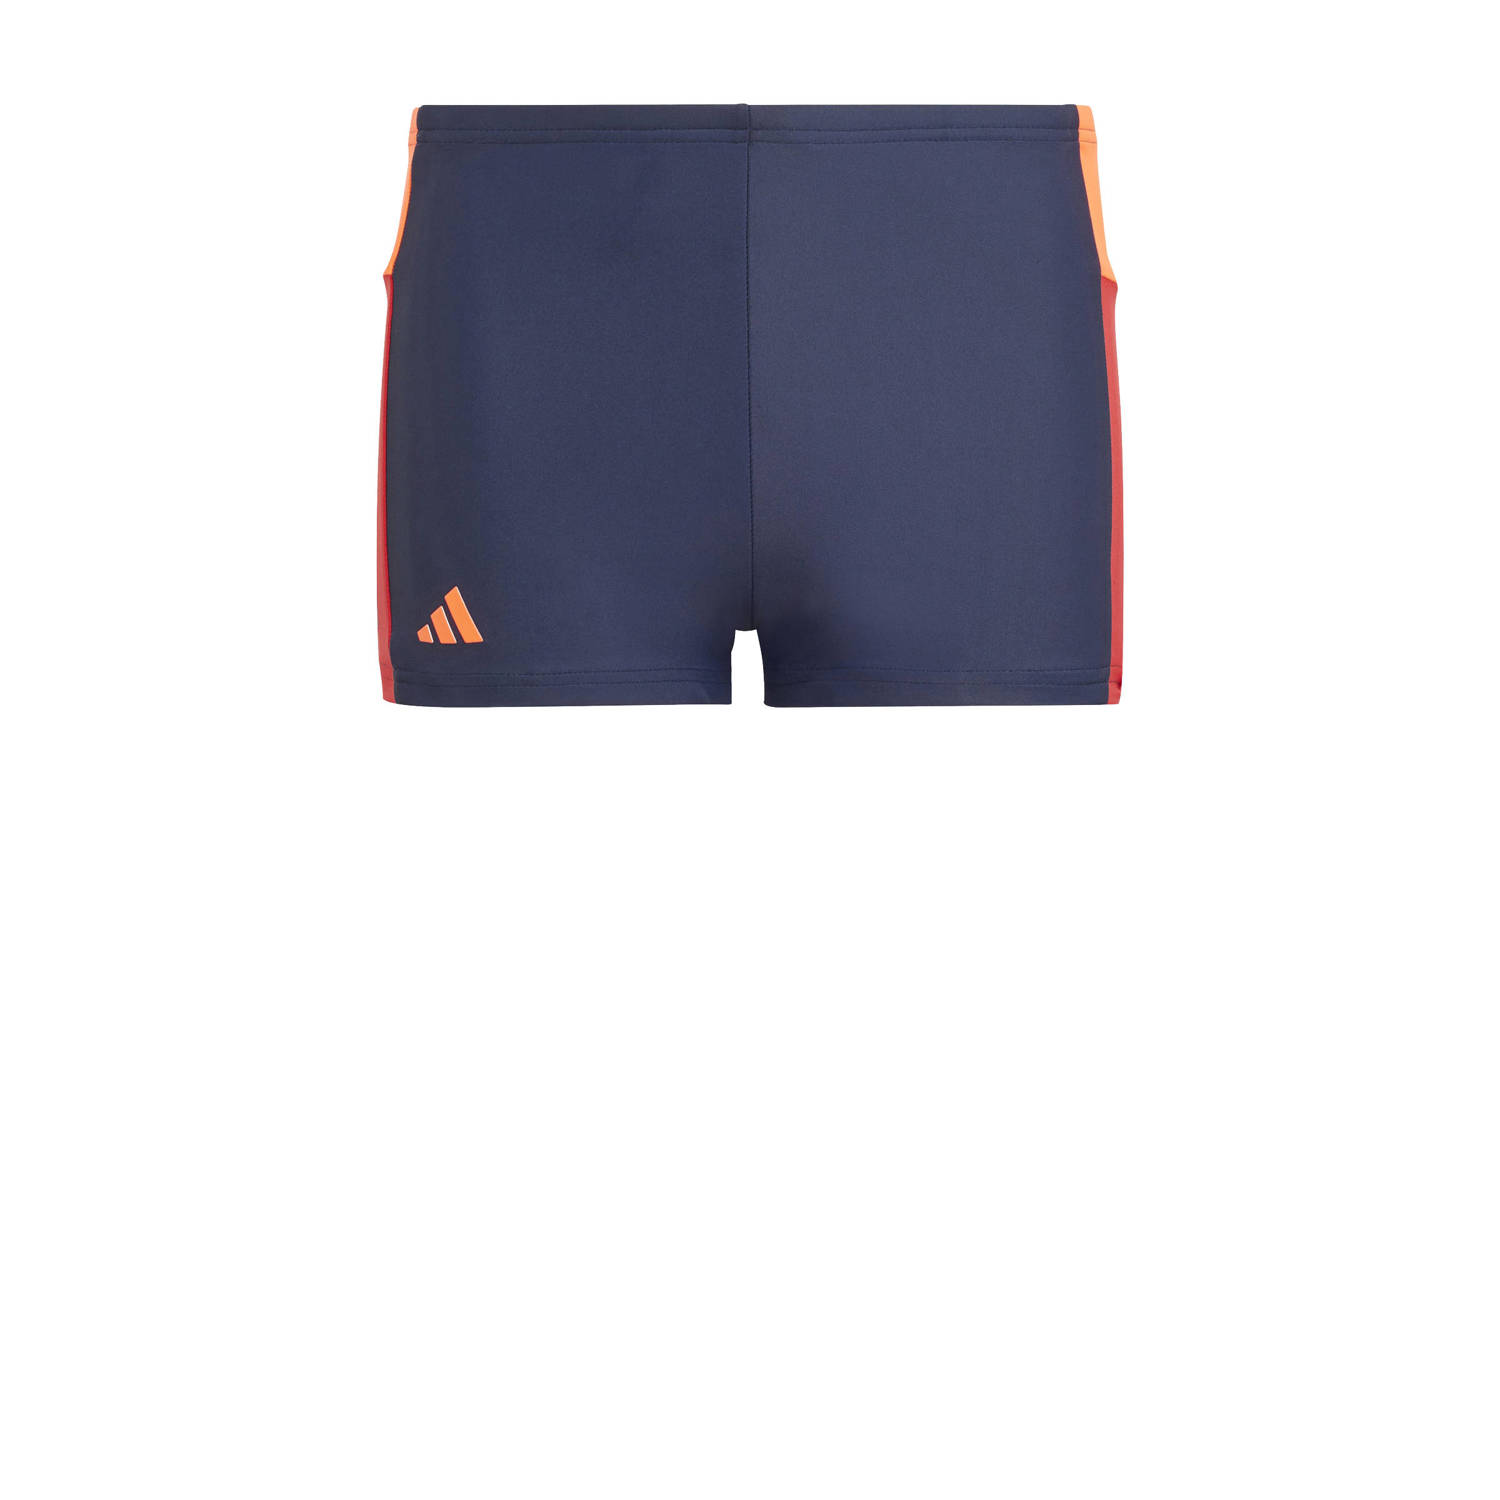 Adidas Perfor ce zwemboxer donkerblauw rood Gerecycled polyamide 128